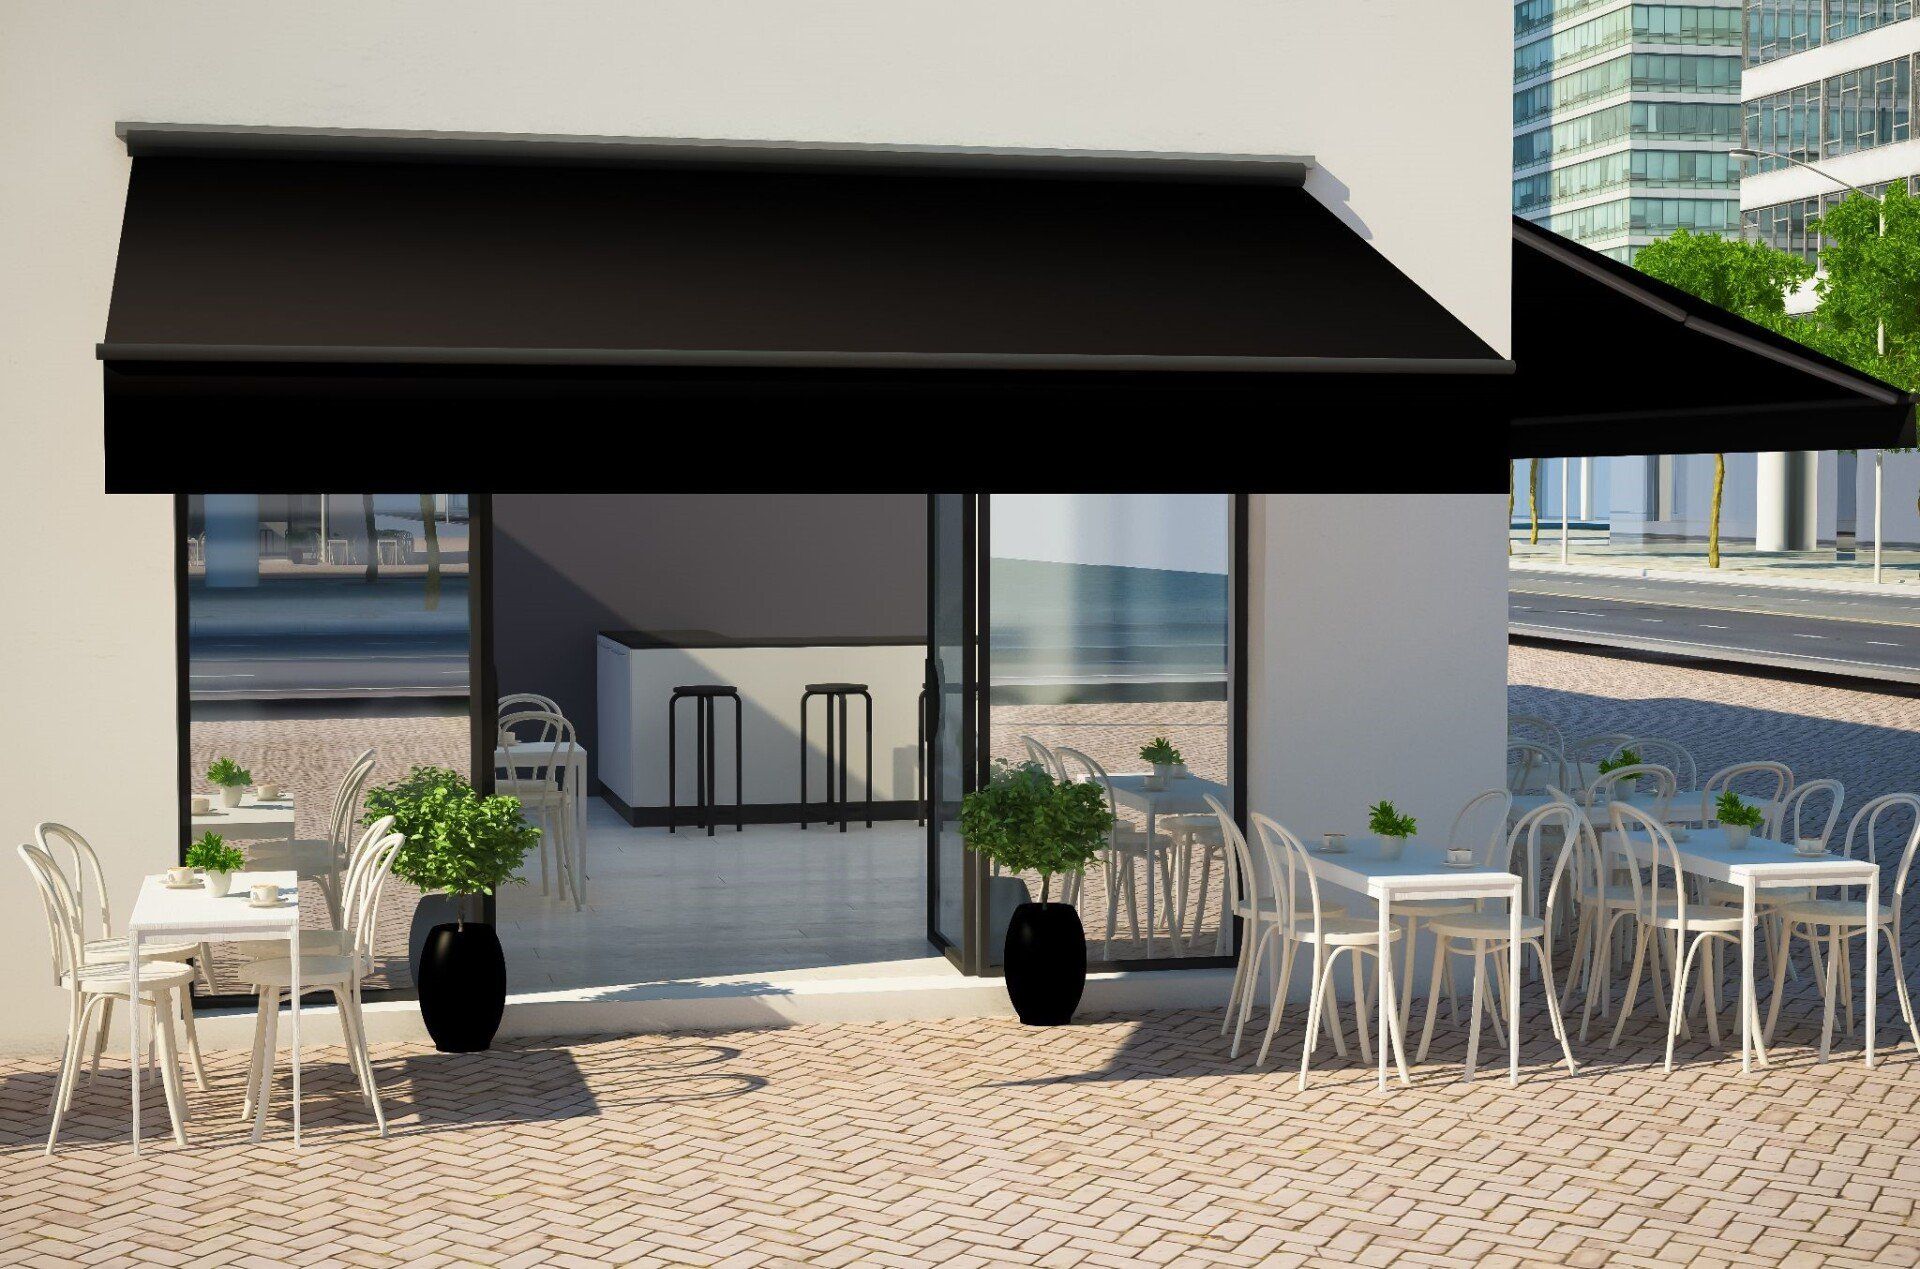 Choosing a commercial awning manufacturer